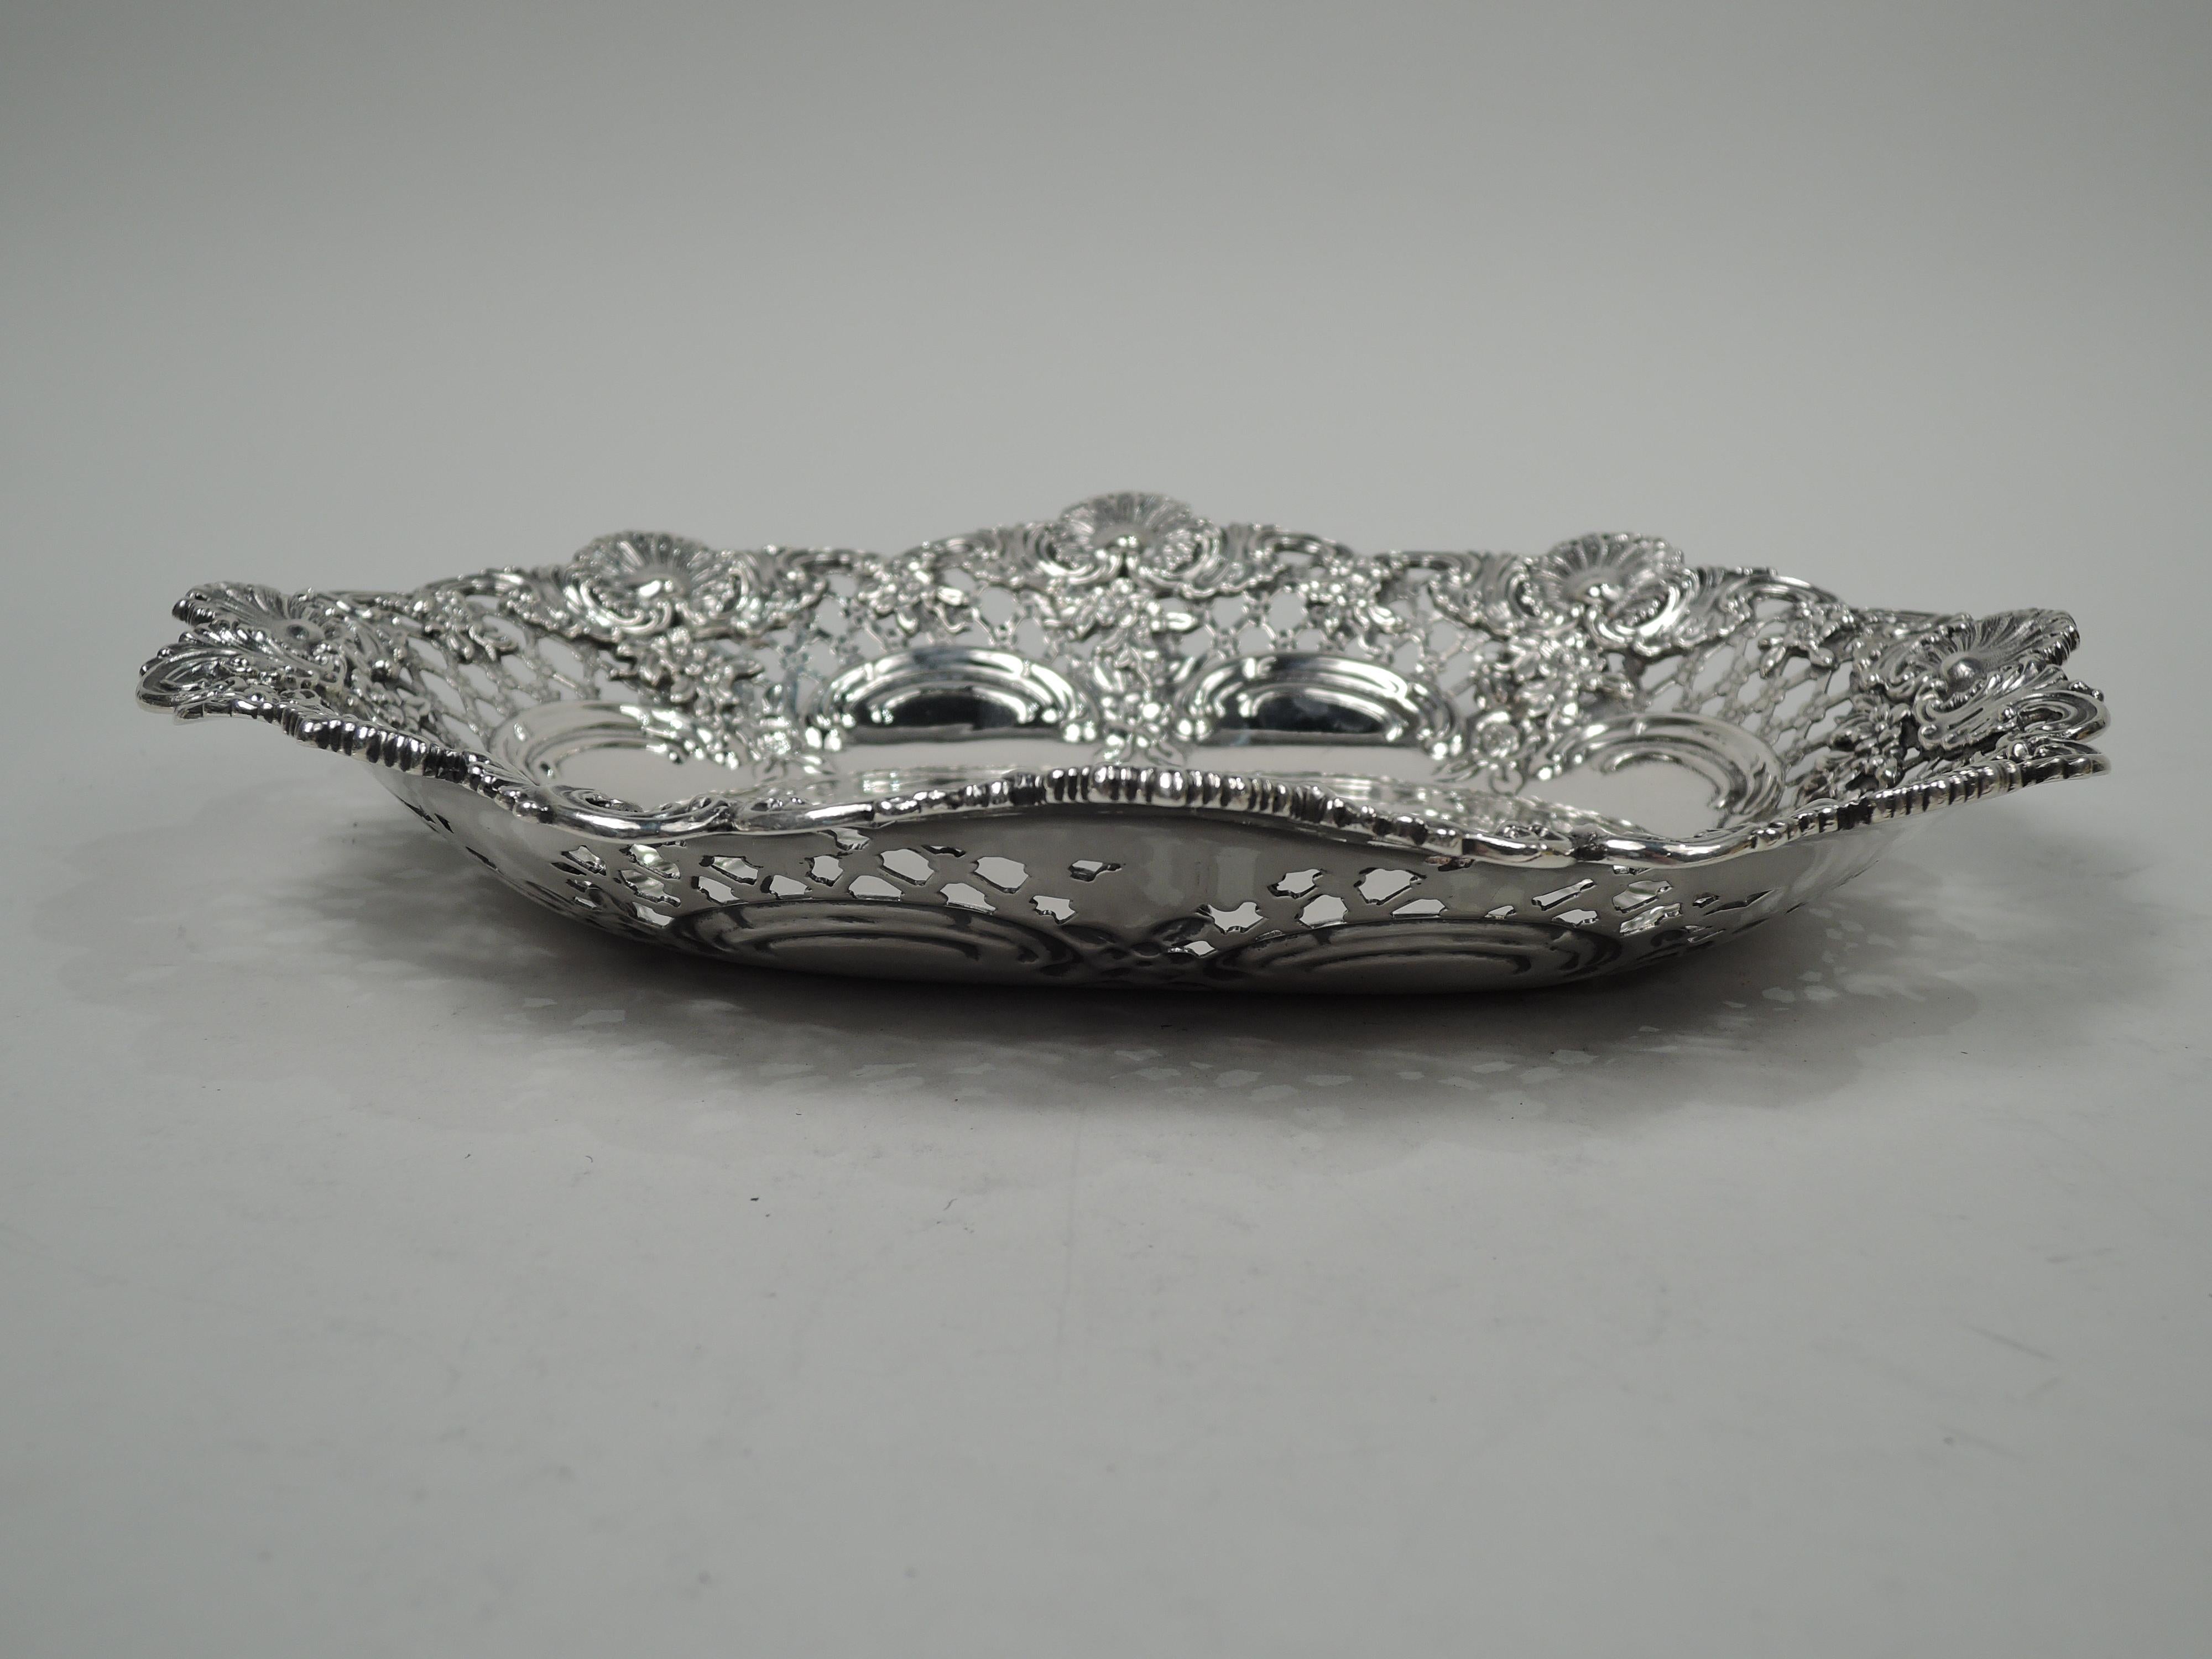 Victorian Classical sterling silver bowl. Made by Tiffany & Co. in New York. Solid oval well with chased scalloped border. Sides tapering open diaper and applied pendant flowers. Dim has applied scallop shells alternating with could c-scrolls. Fully